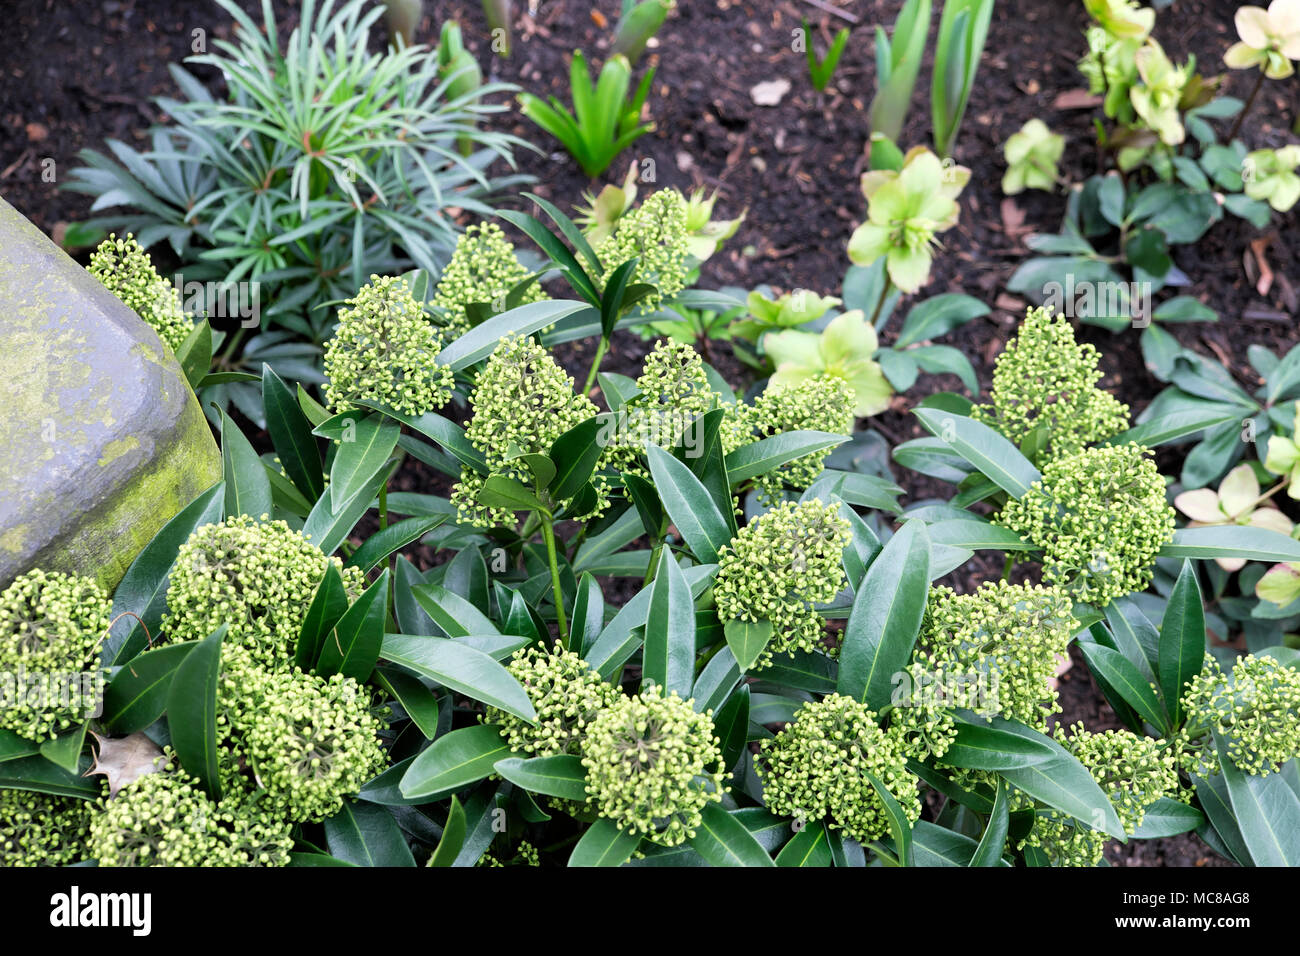 Skimmia x confusa 'Kew Green'  fragrant shrub growing with hellebore in winter a garden whose flowers will bloom in spring London UK  KATHY DEWITT Stock Photo